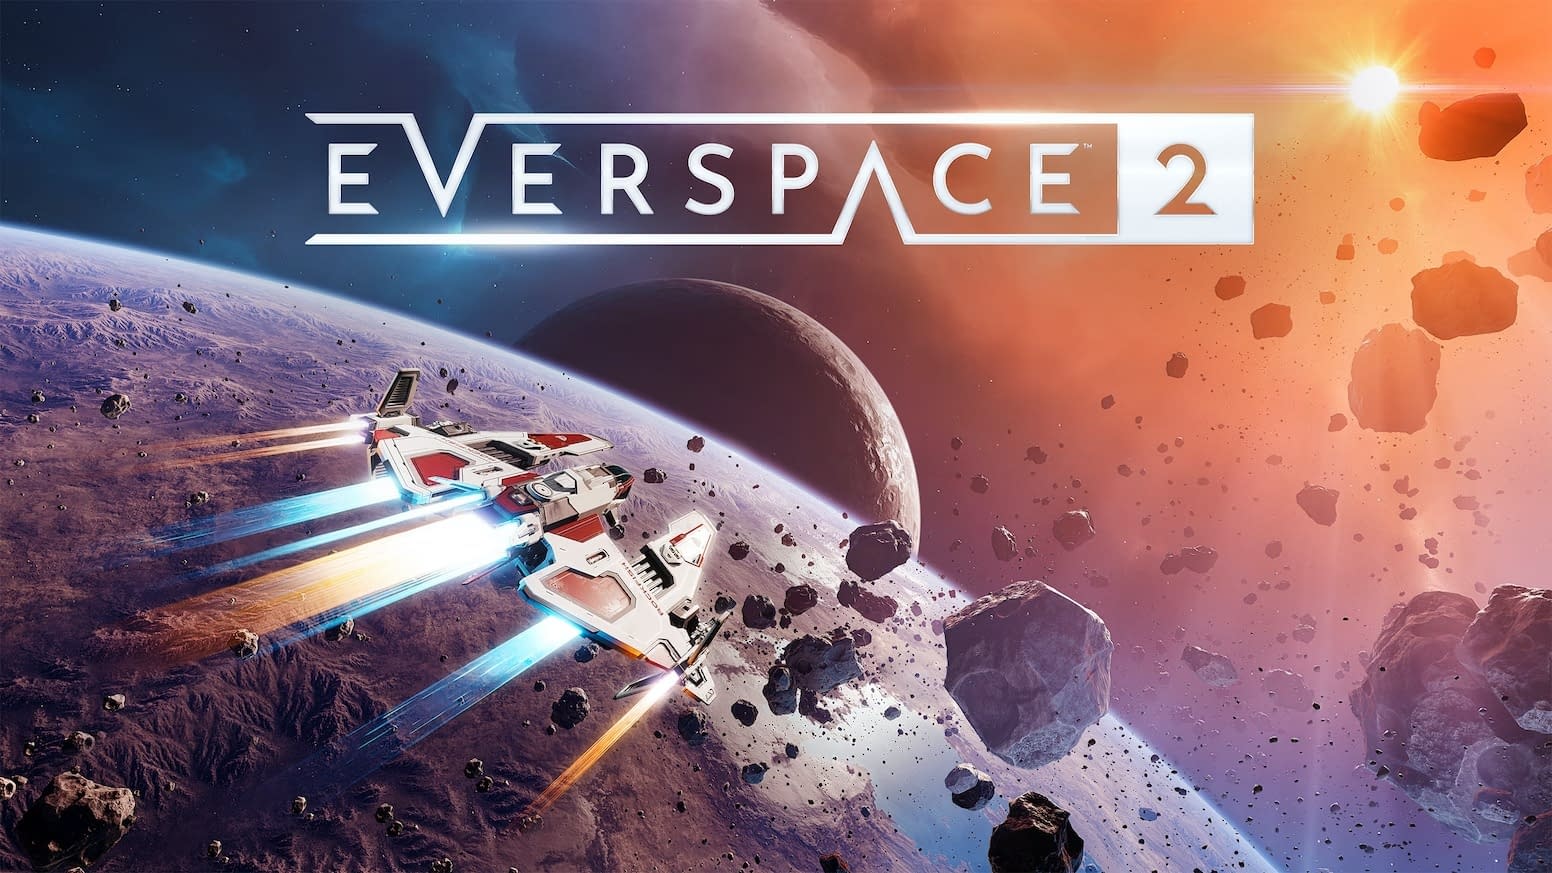 Space Theme Simulation Game Everspace 2 Fights Full Version